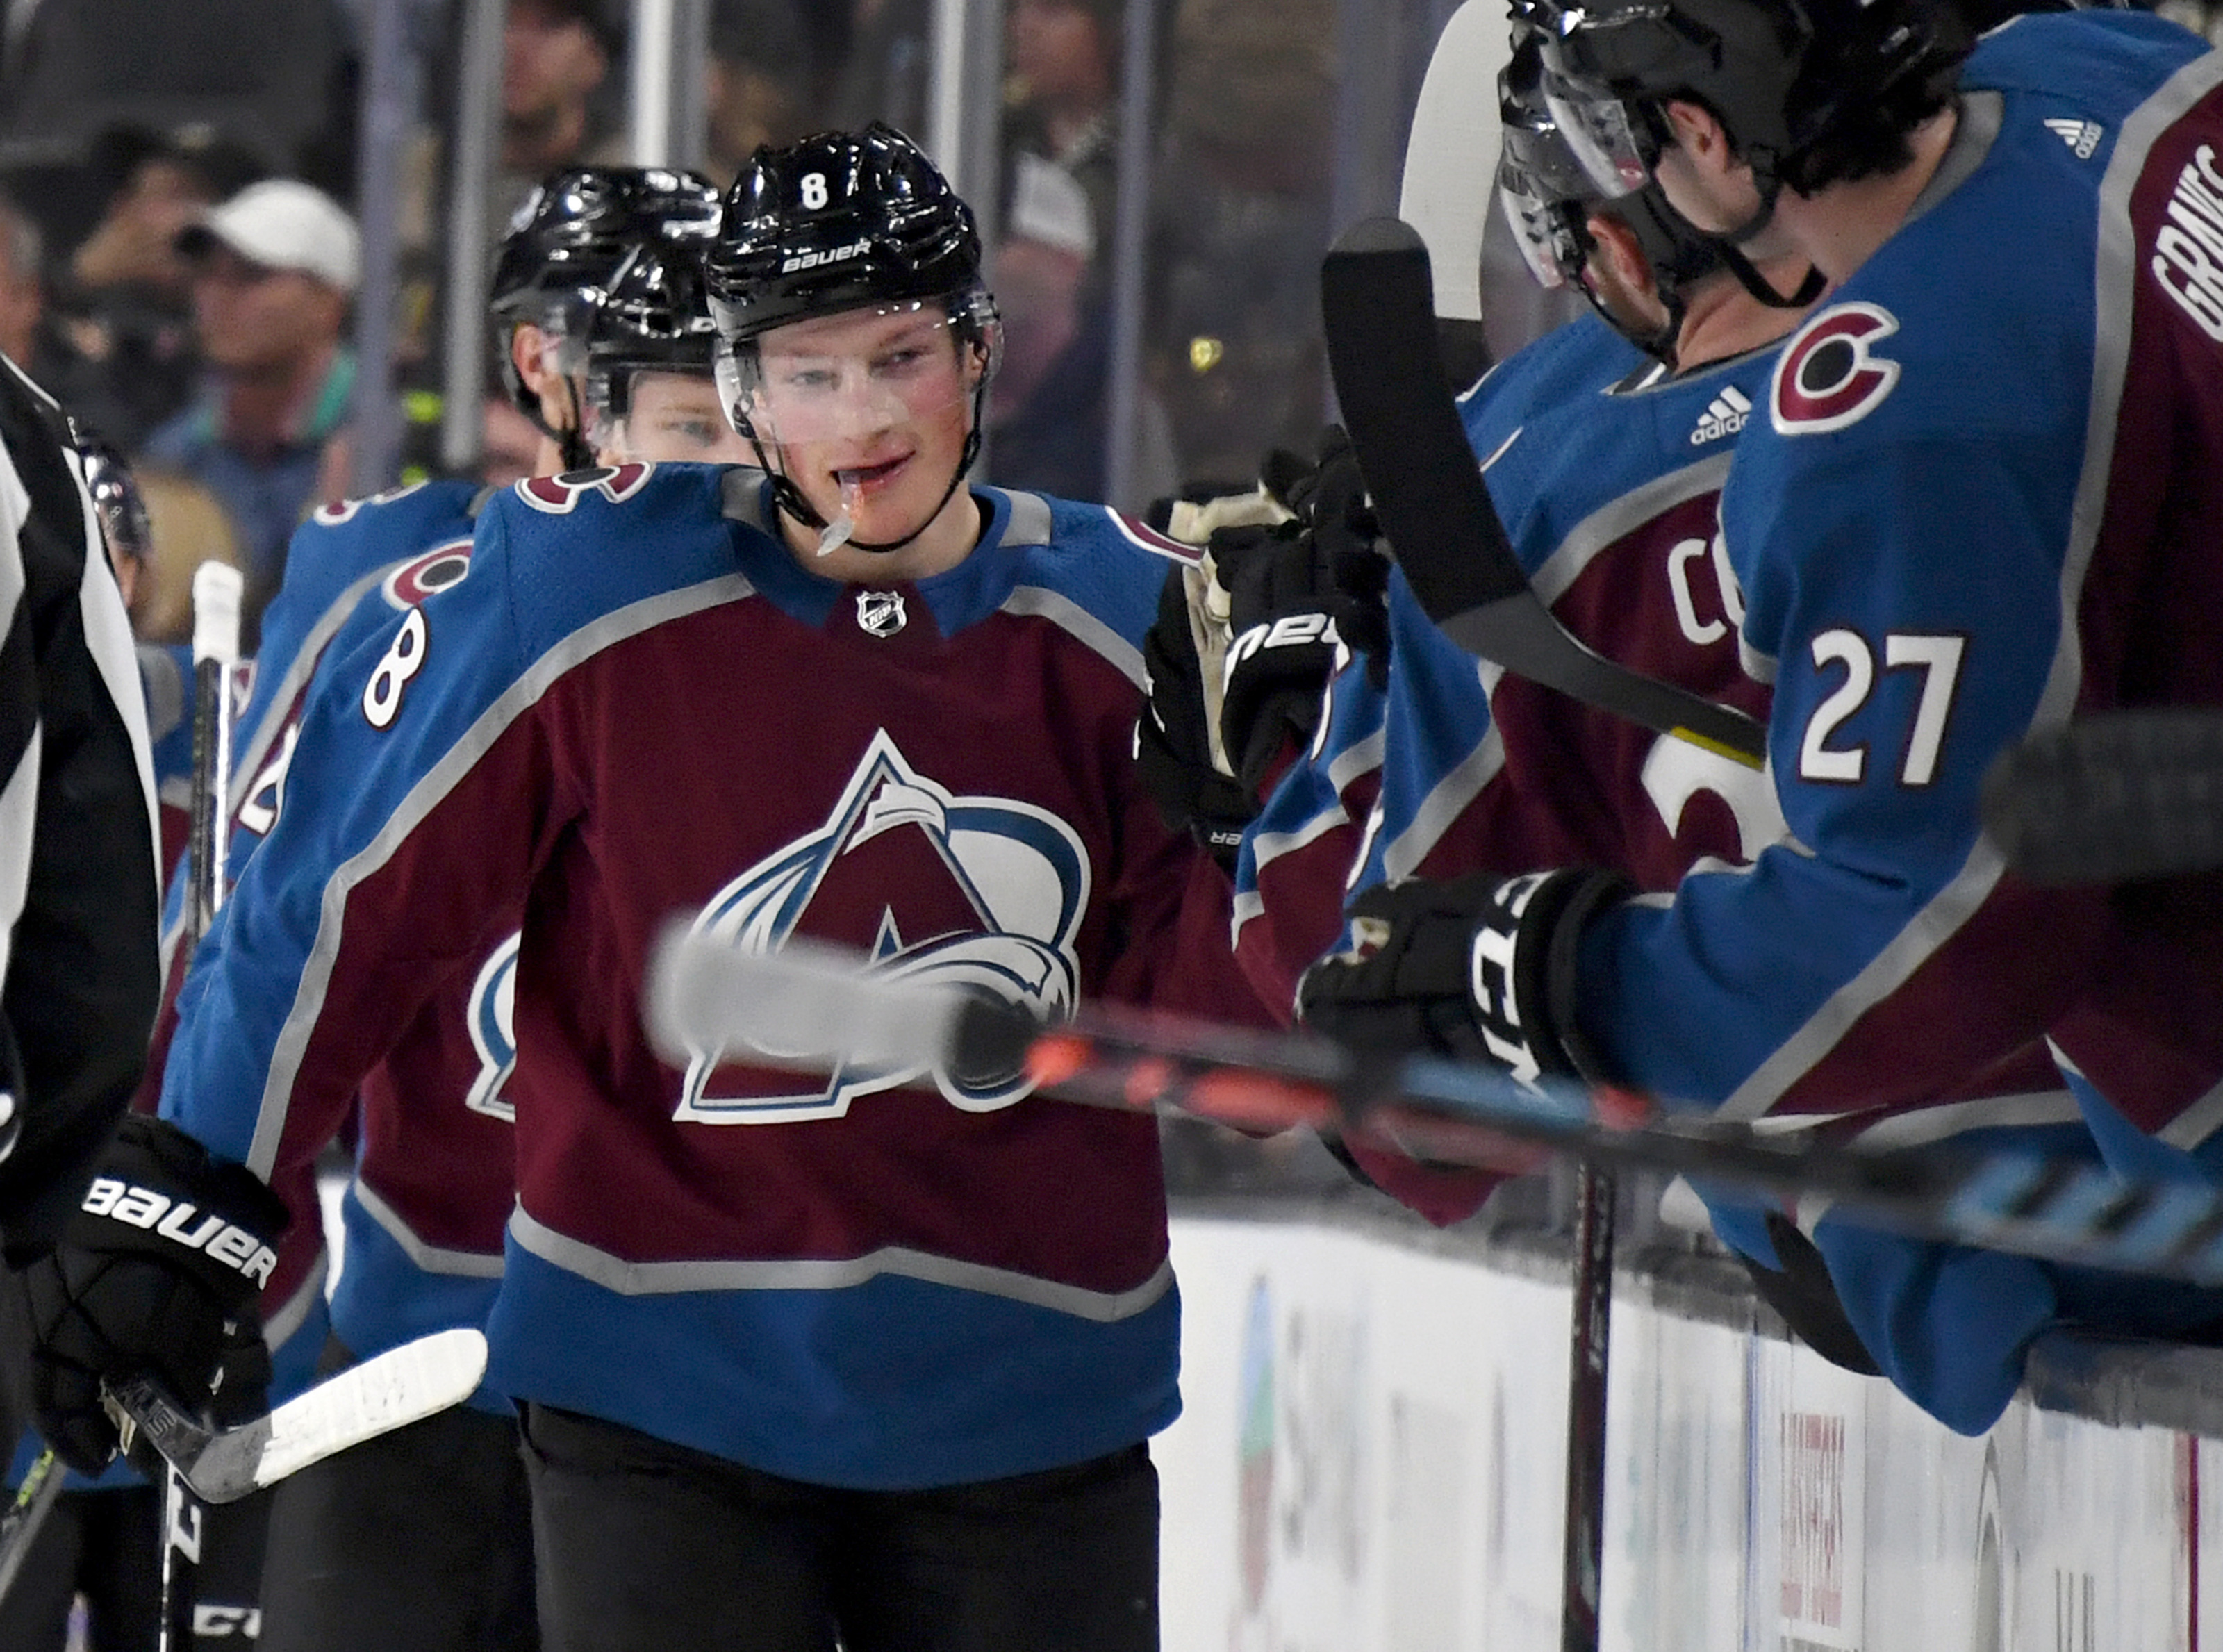 At the Rink: Top-Ranked Colorado Avalanche Revel in the Return of Fans